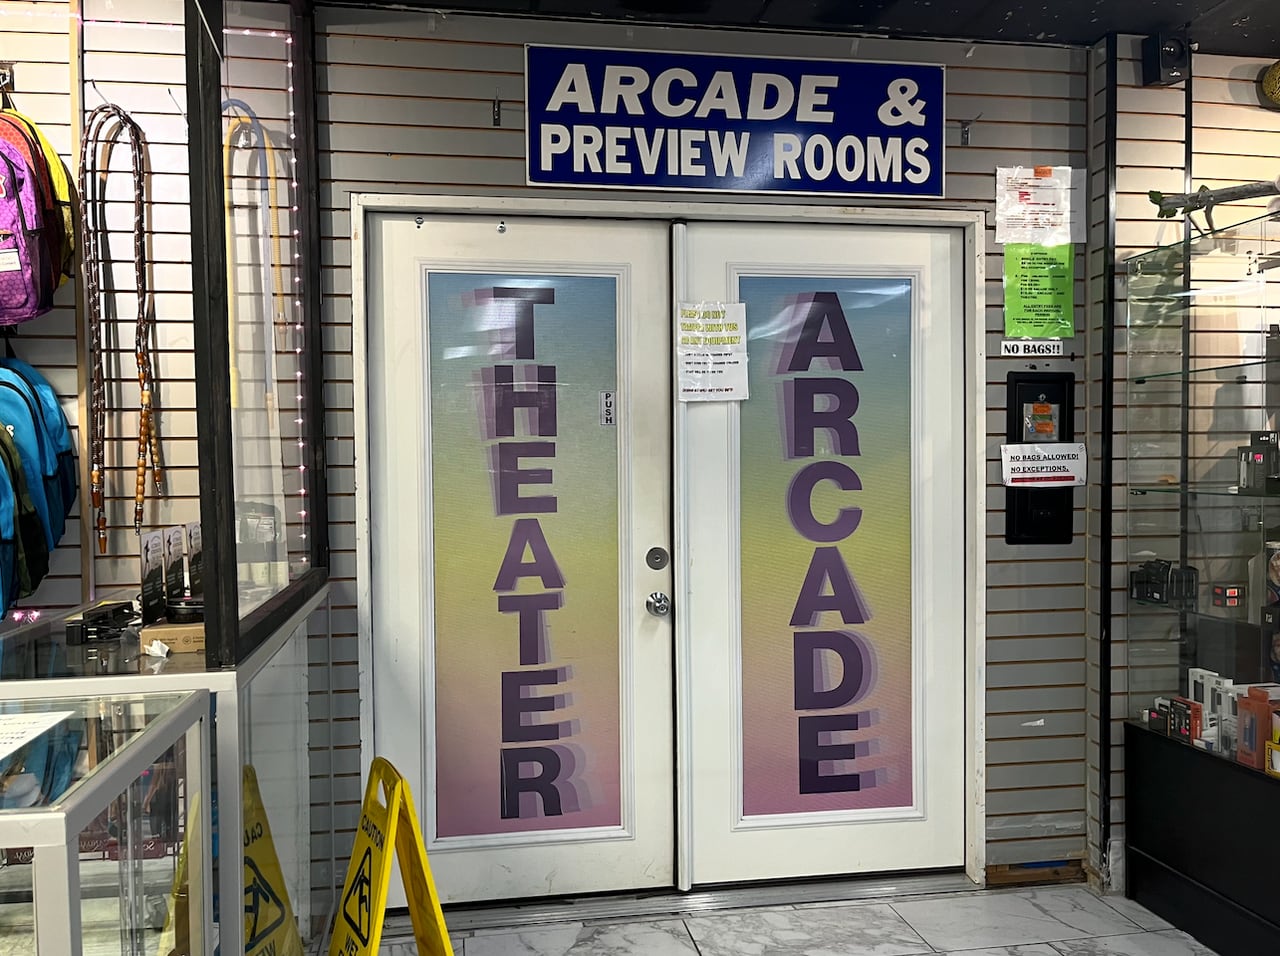 A photo of a store interior with a set of double doors that say "Theater" and "Arcade." A sign above the doors says "Arcade & preview rooms."